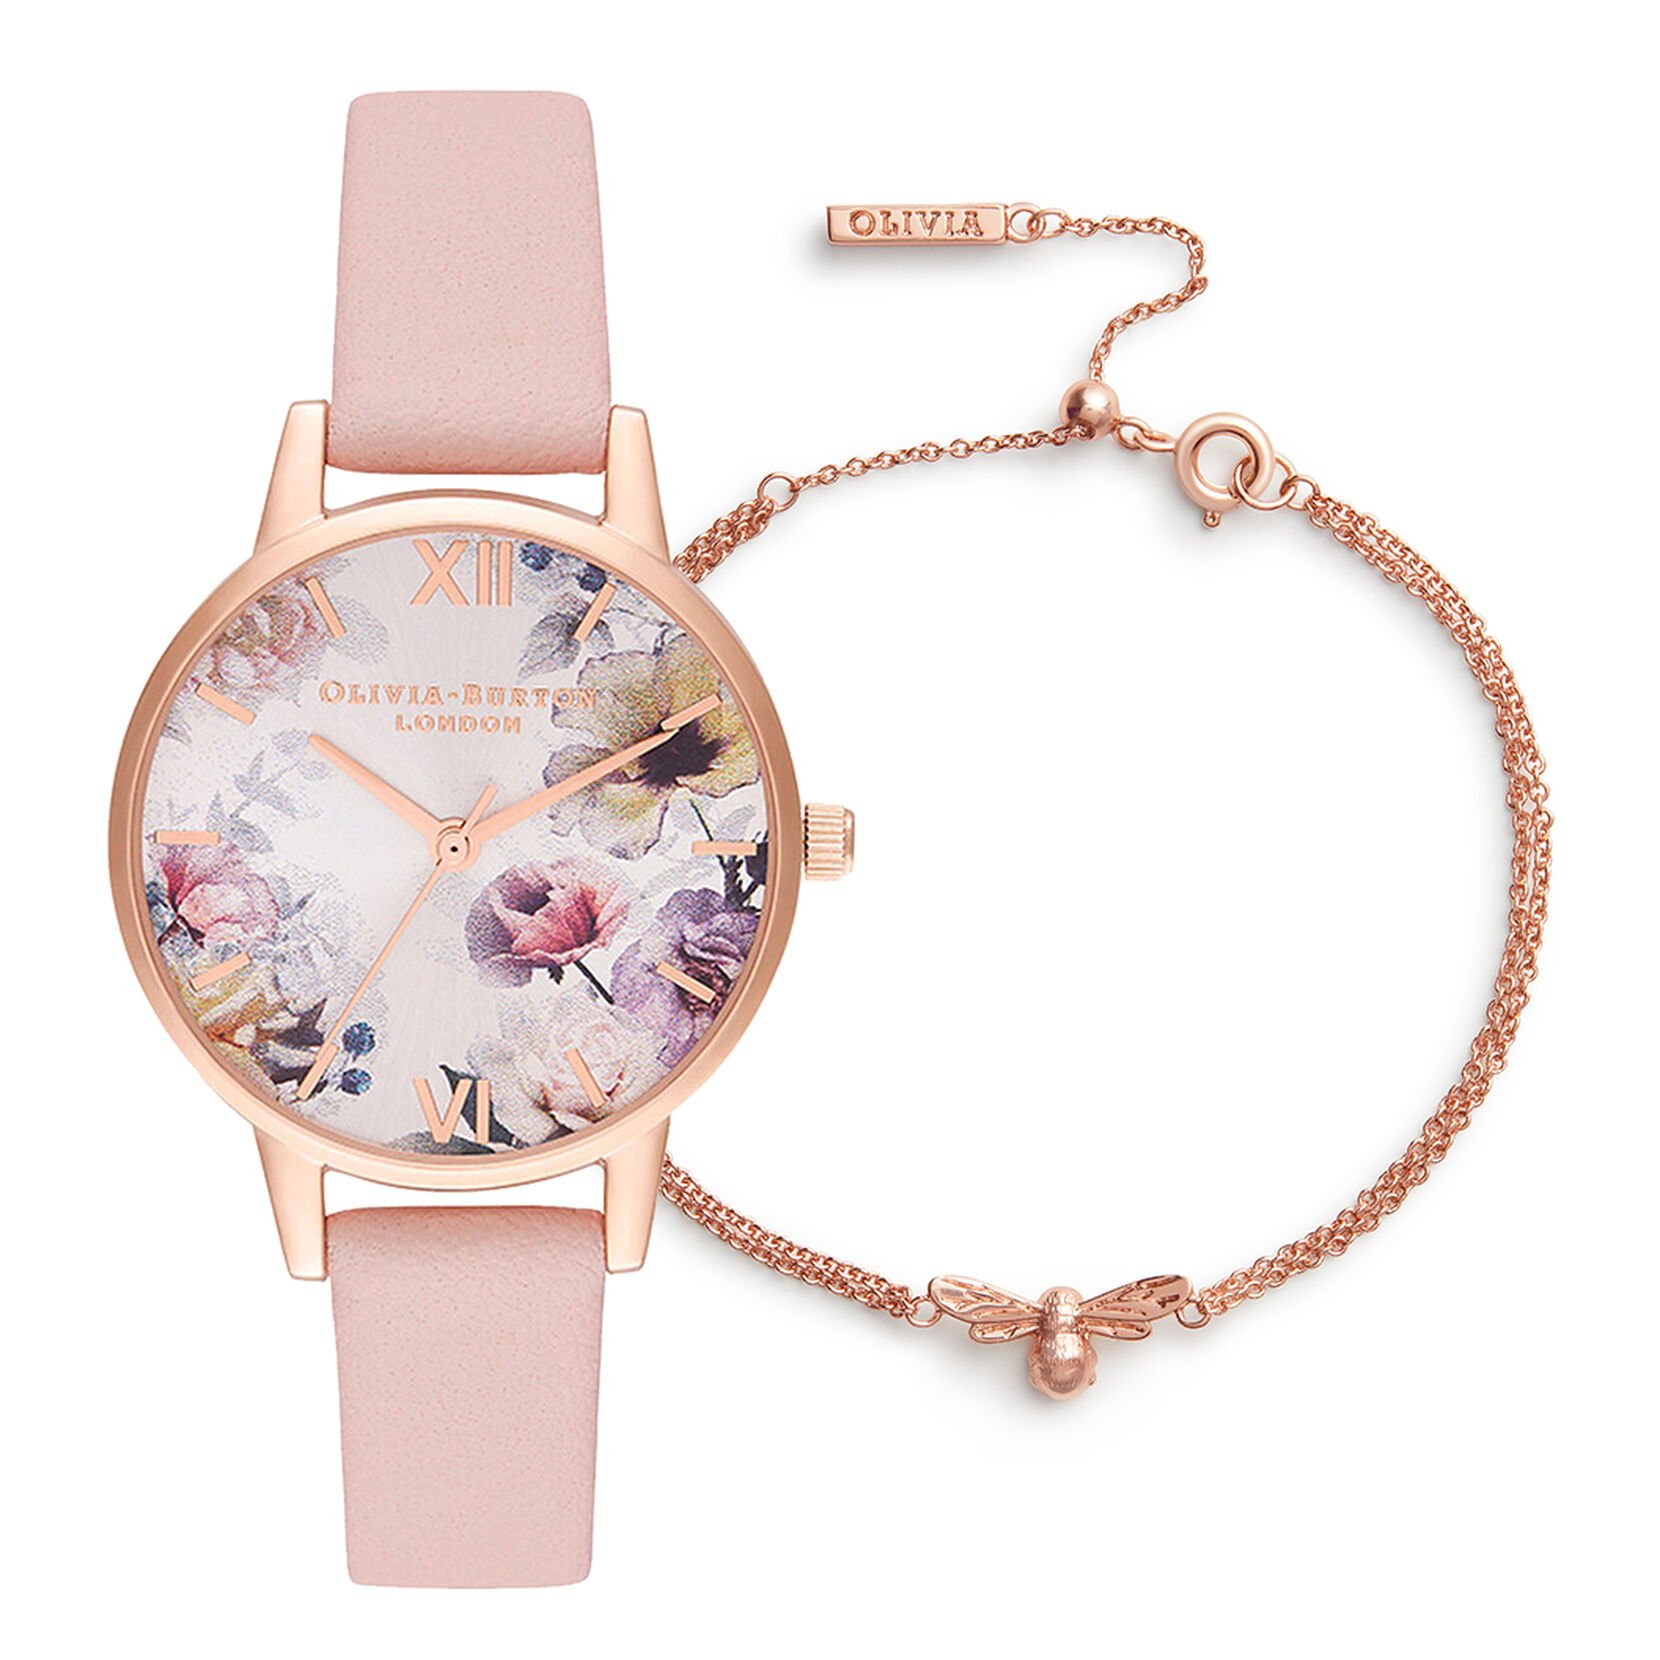 Lucky Bee Midi Sunlight Floral Dusty Pink, Rose Gold Watch & Lucky Bee Chain Bracelet